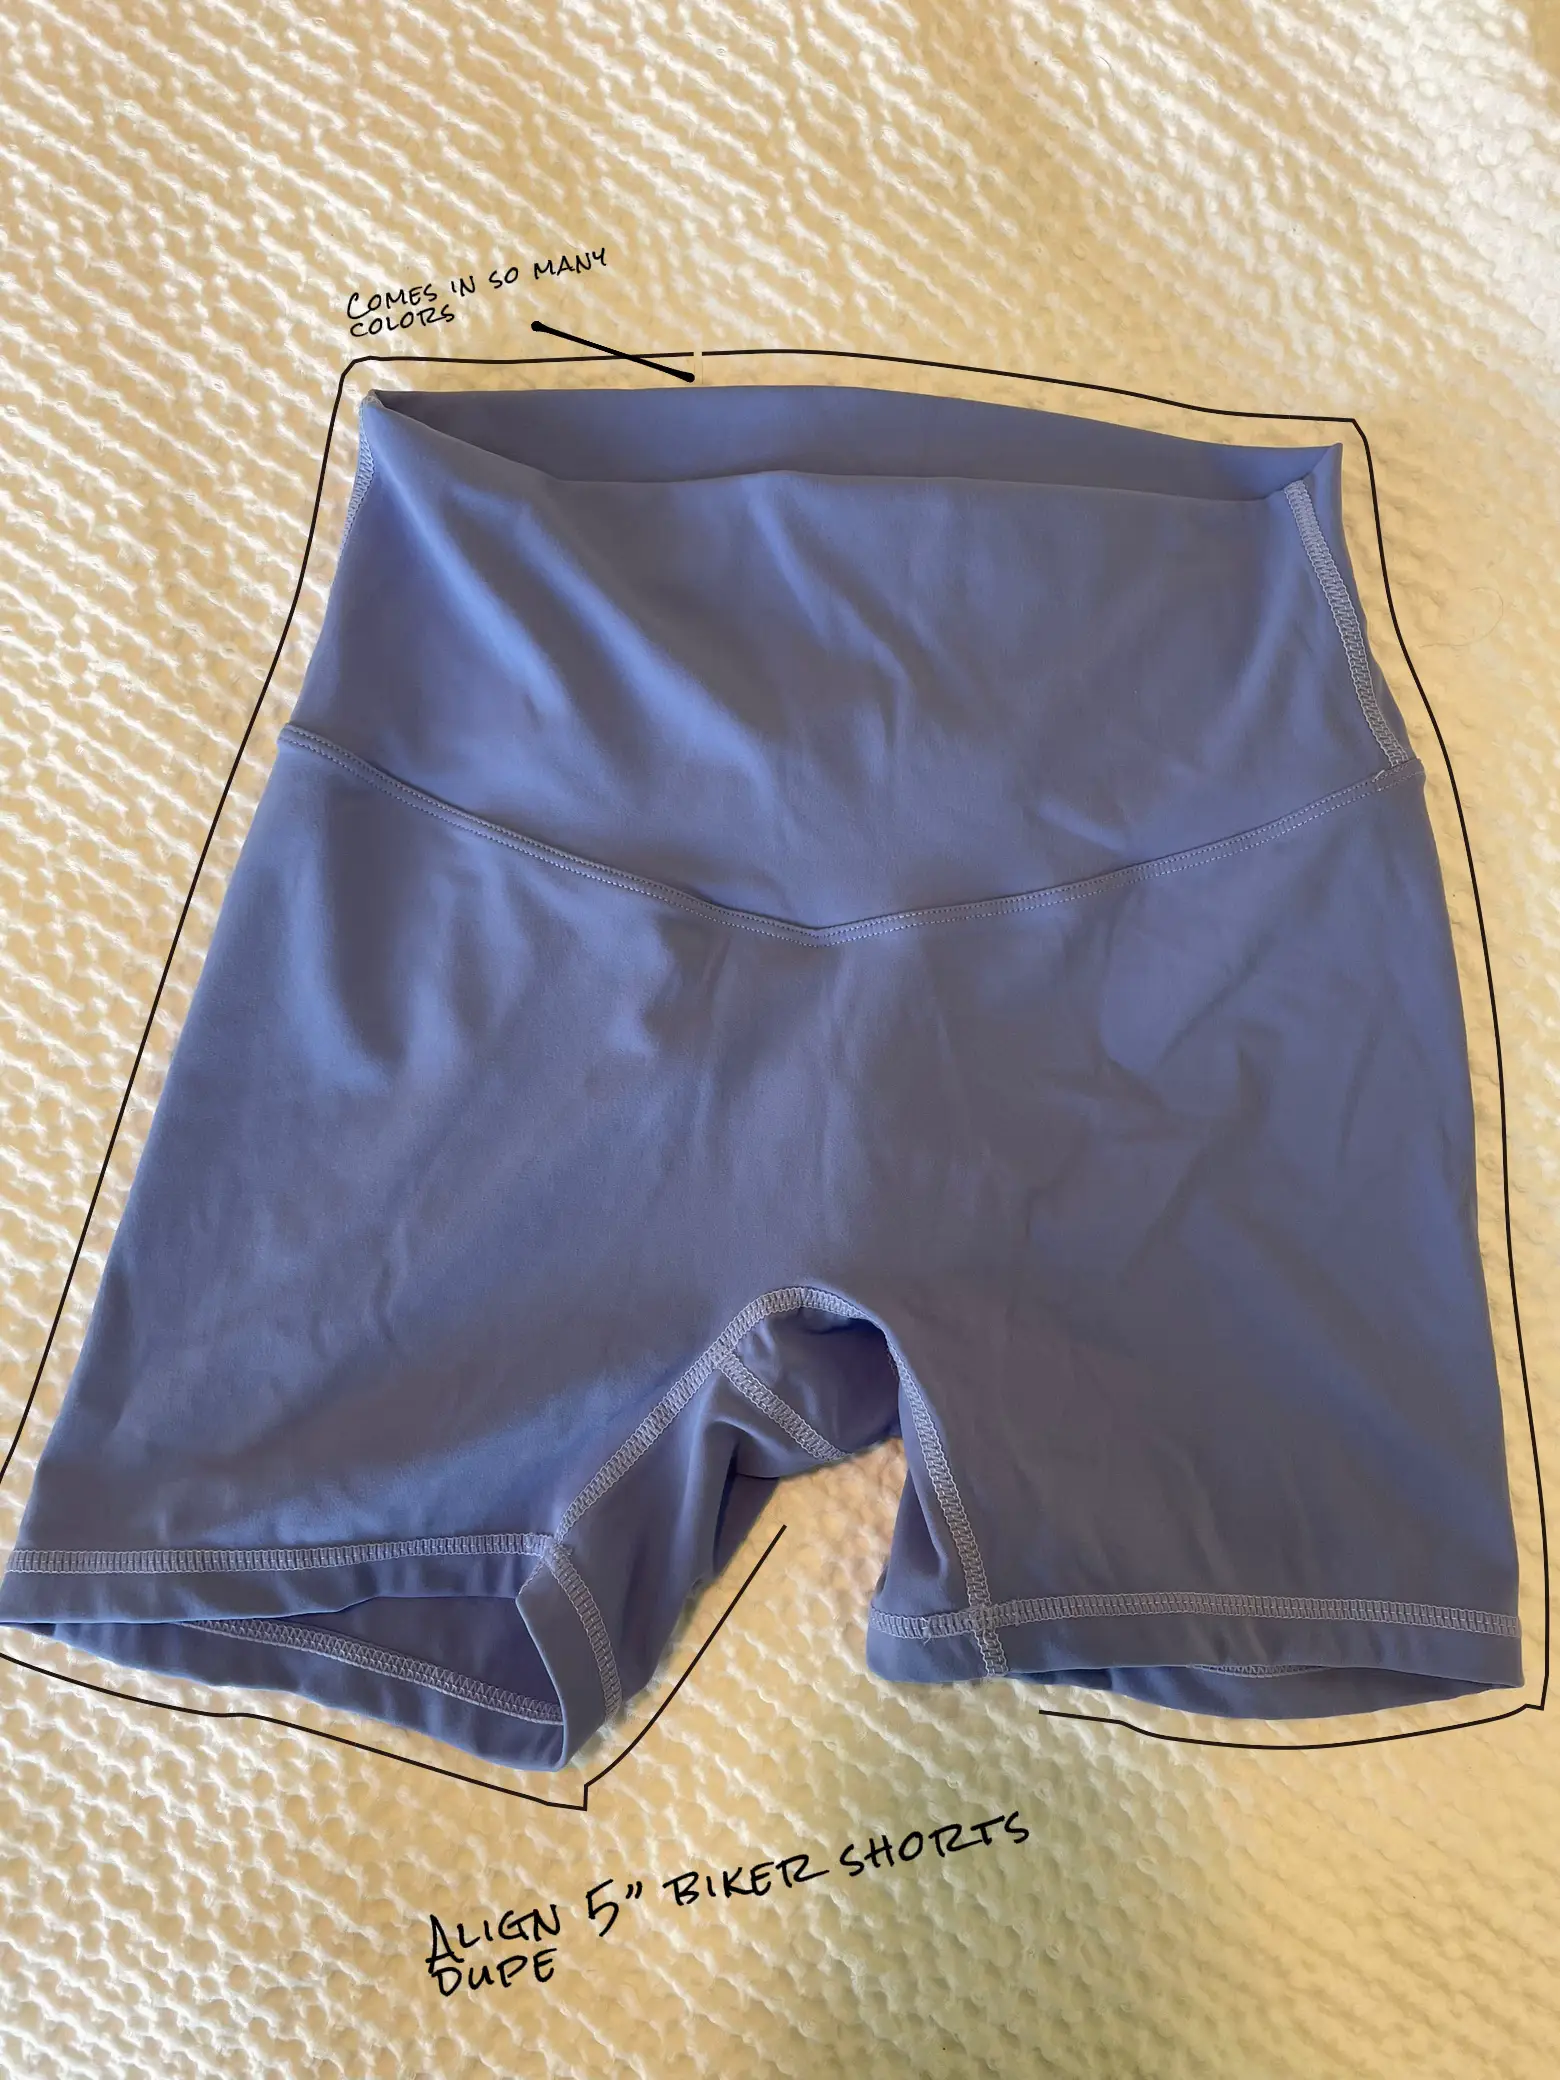 New Align Shorts! Align HR Short 8” and Align HR 6” in Nulu Cool